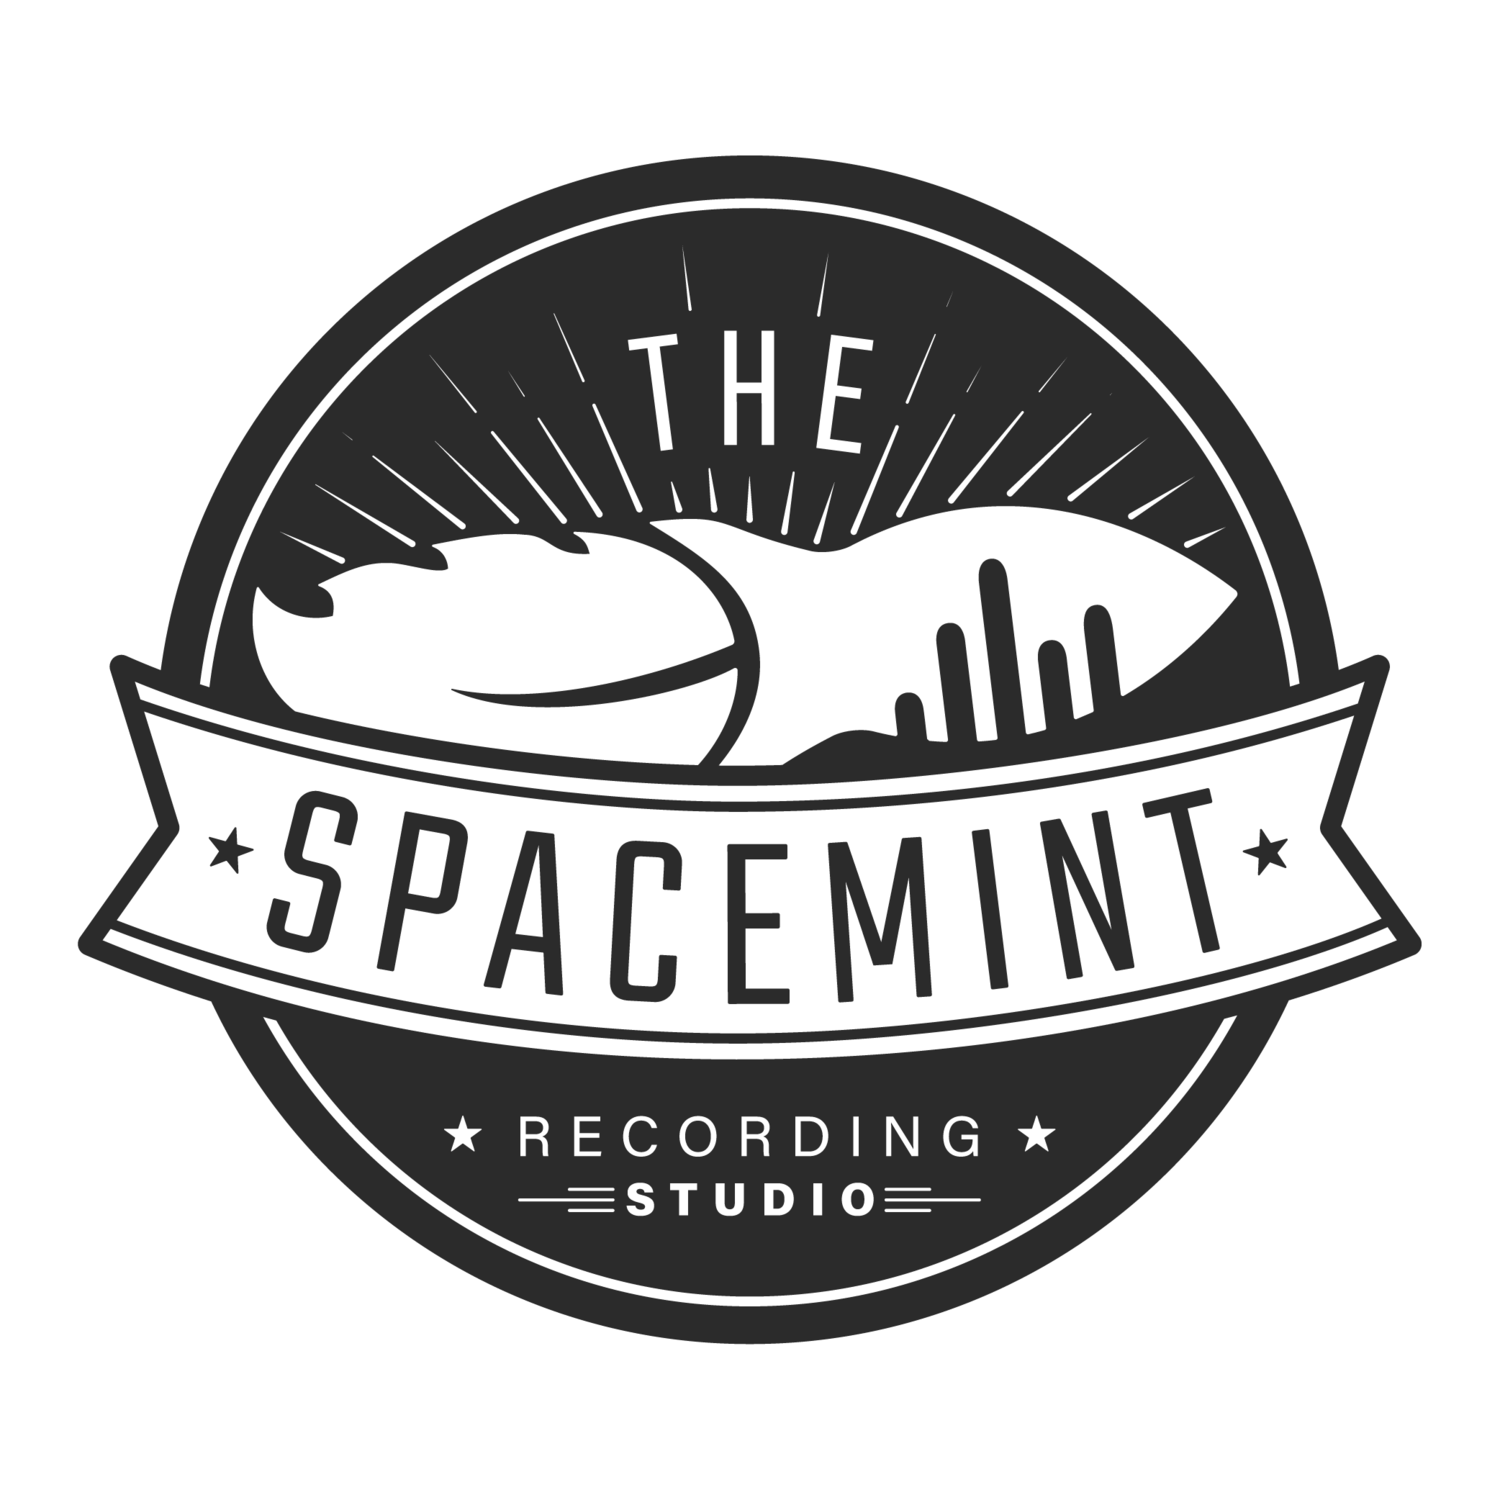 THE SPACEMINT